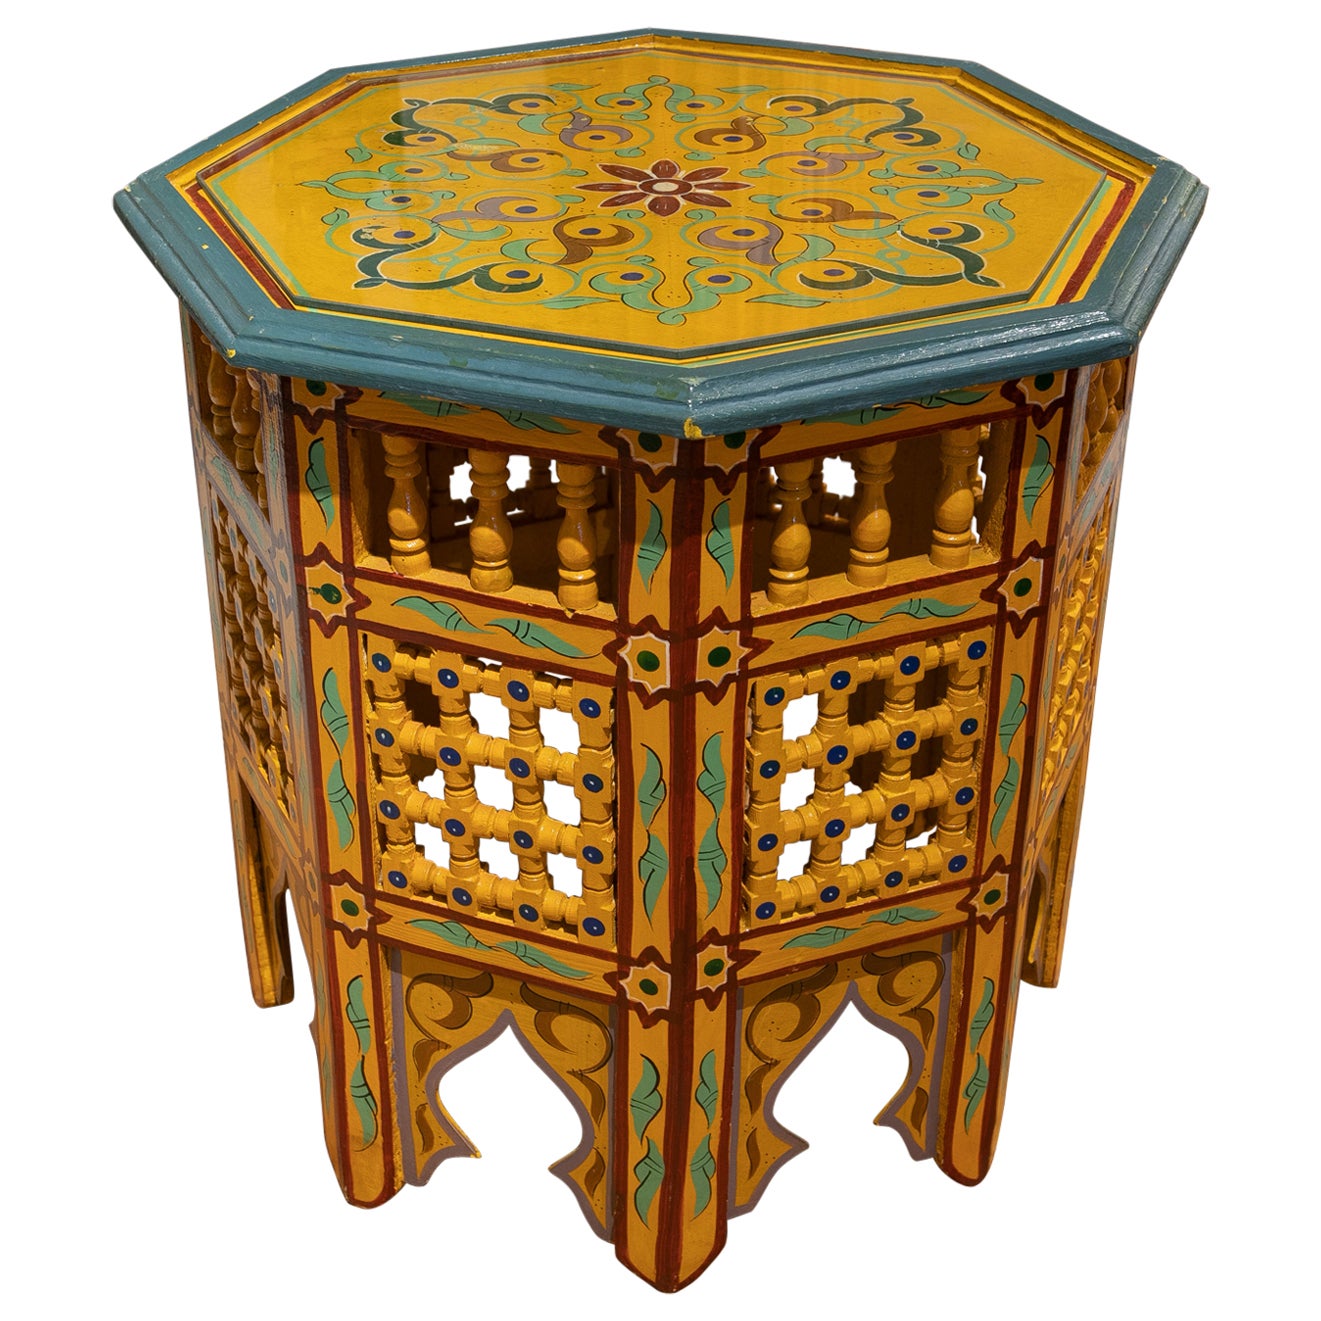 Octagonal wooden sidetable handpainted in yellow and green